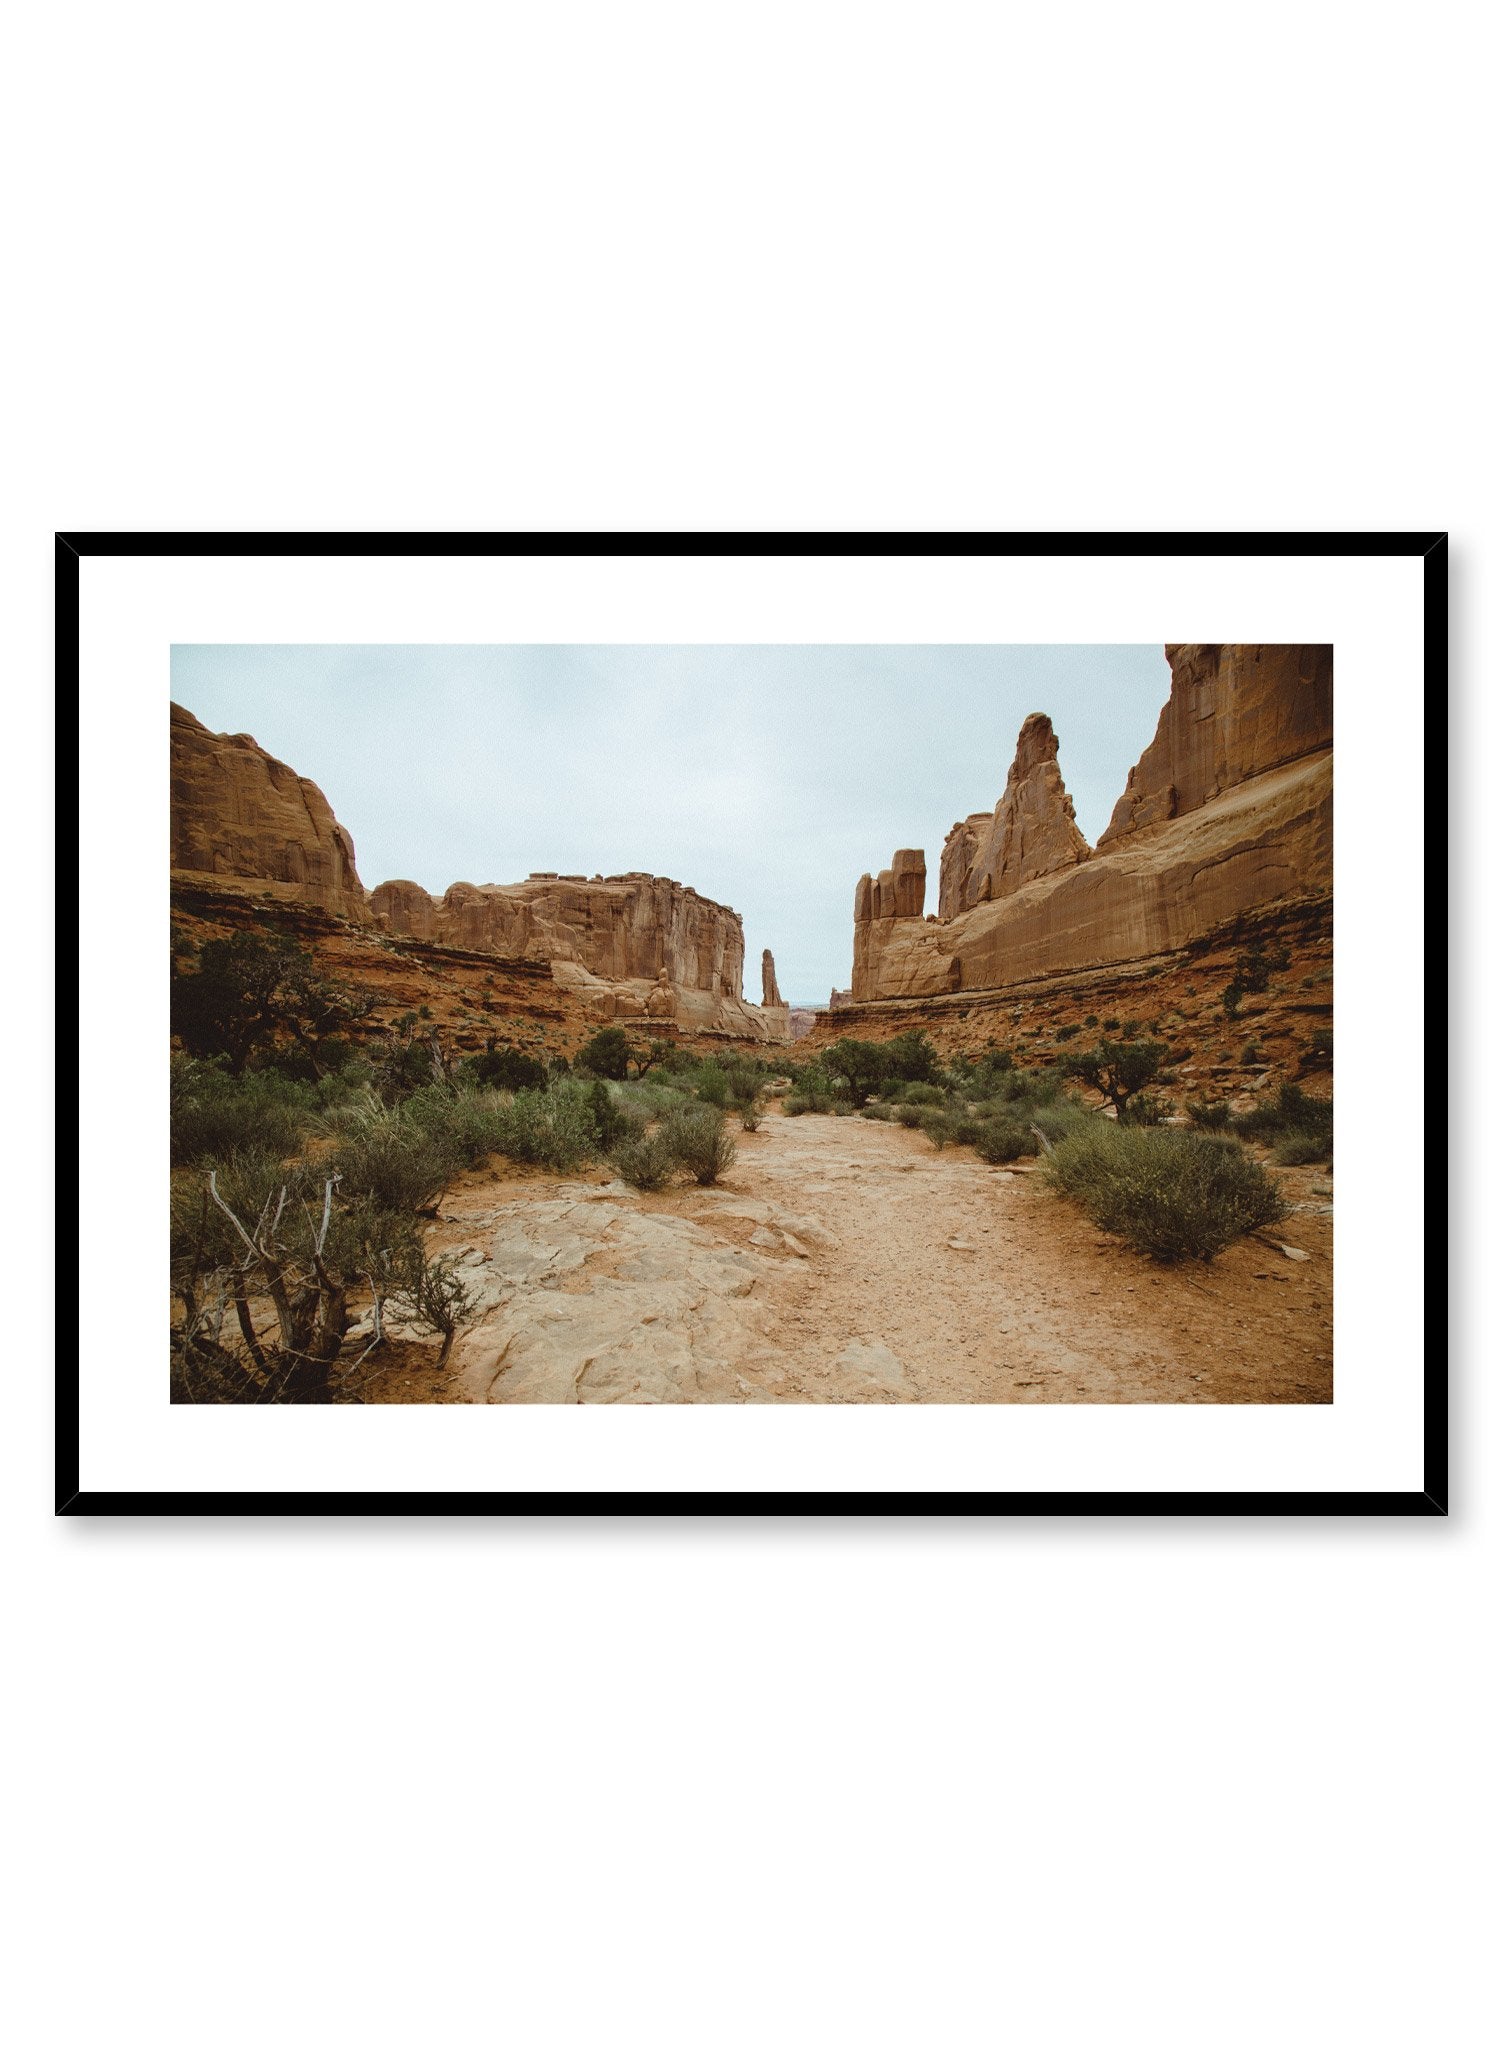 Modern landscape photography poster by Opposite Wall with rock formations in the desert.